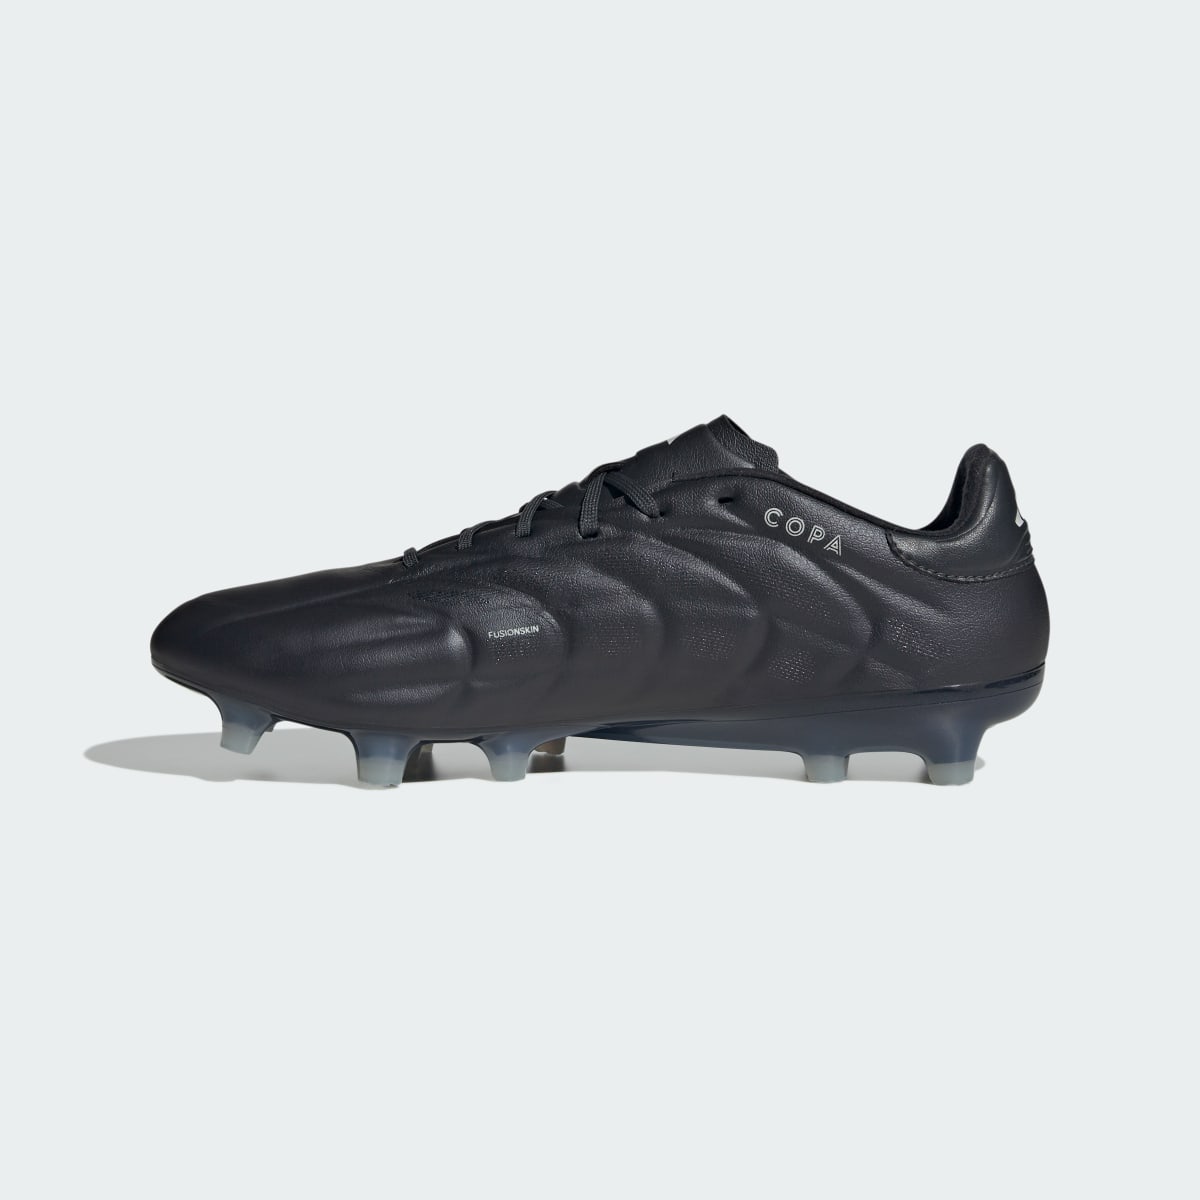 Adidas Copa Pure II Elite Firm Ground Boots. 7